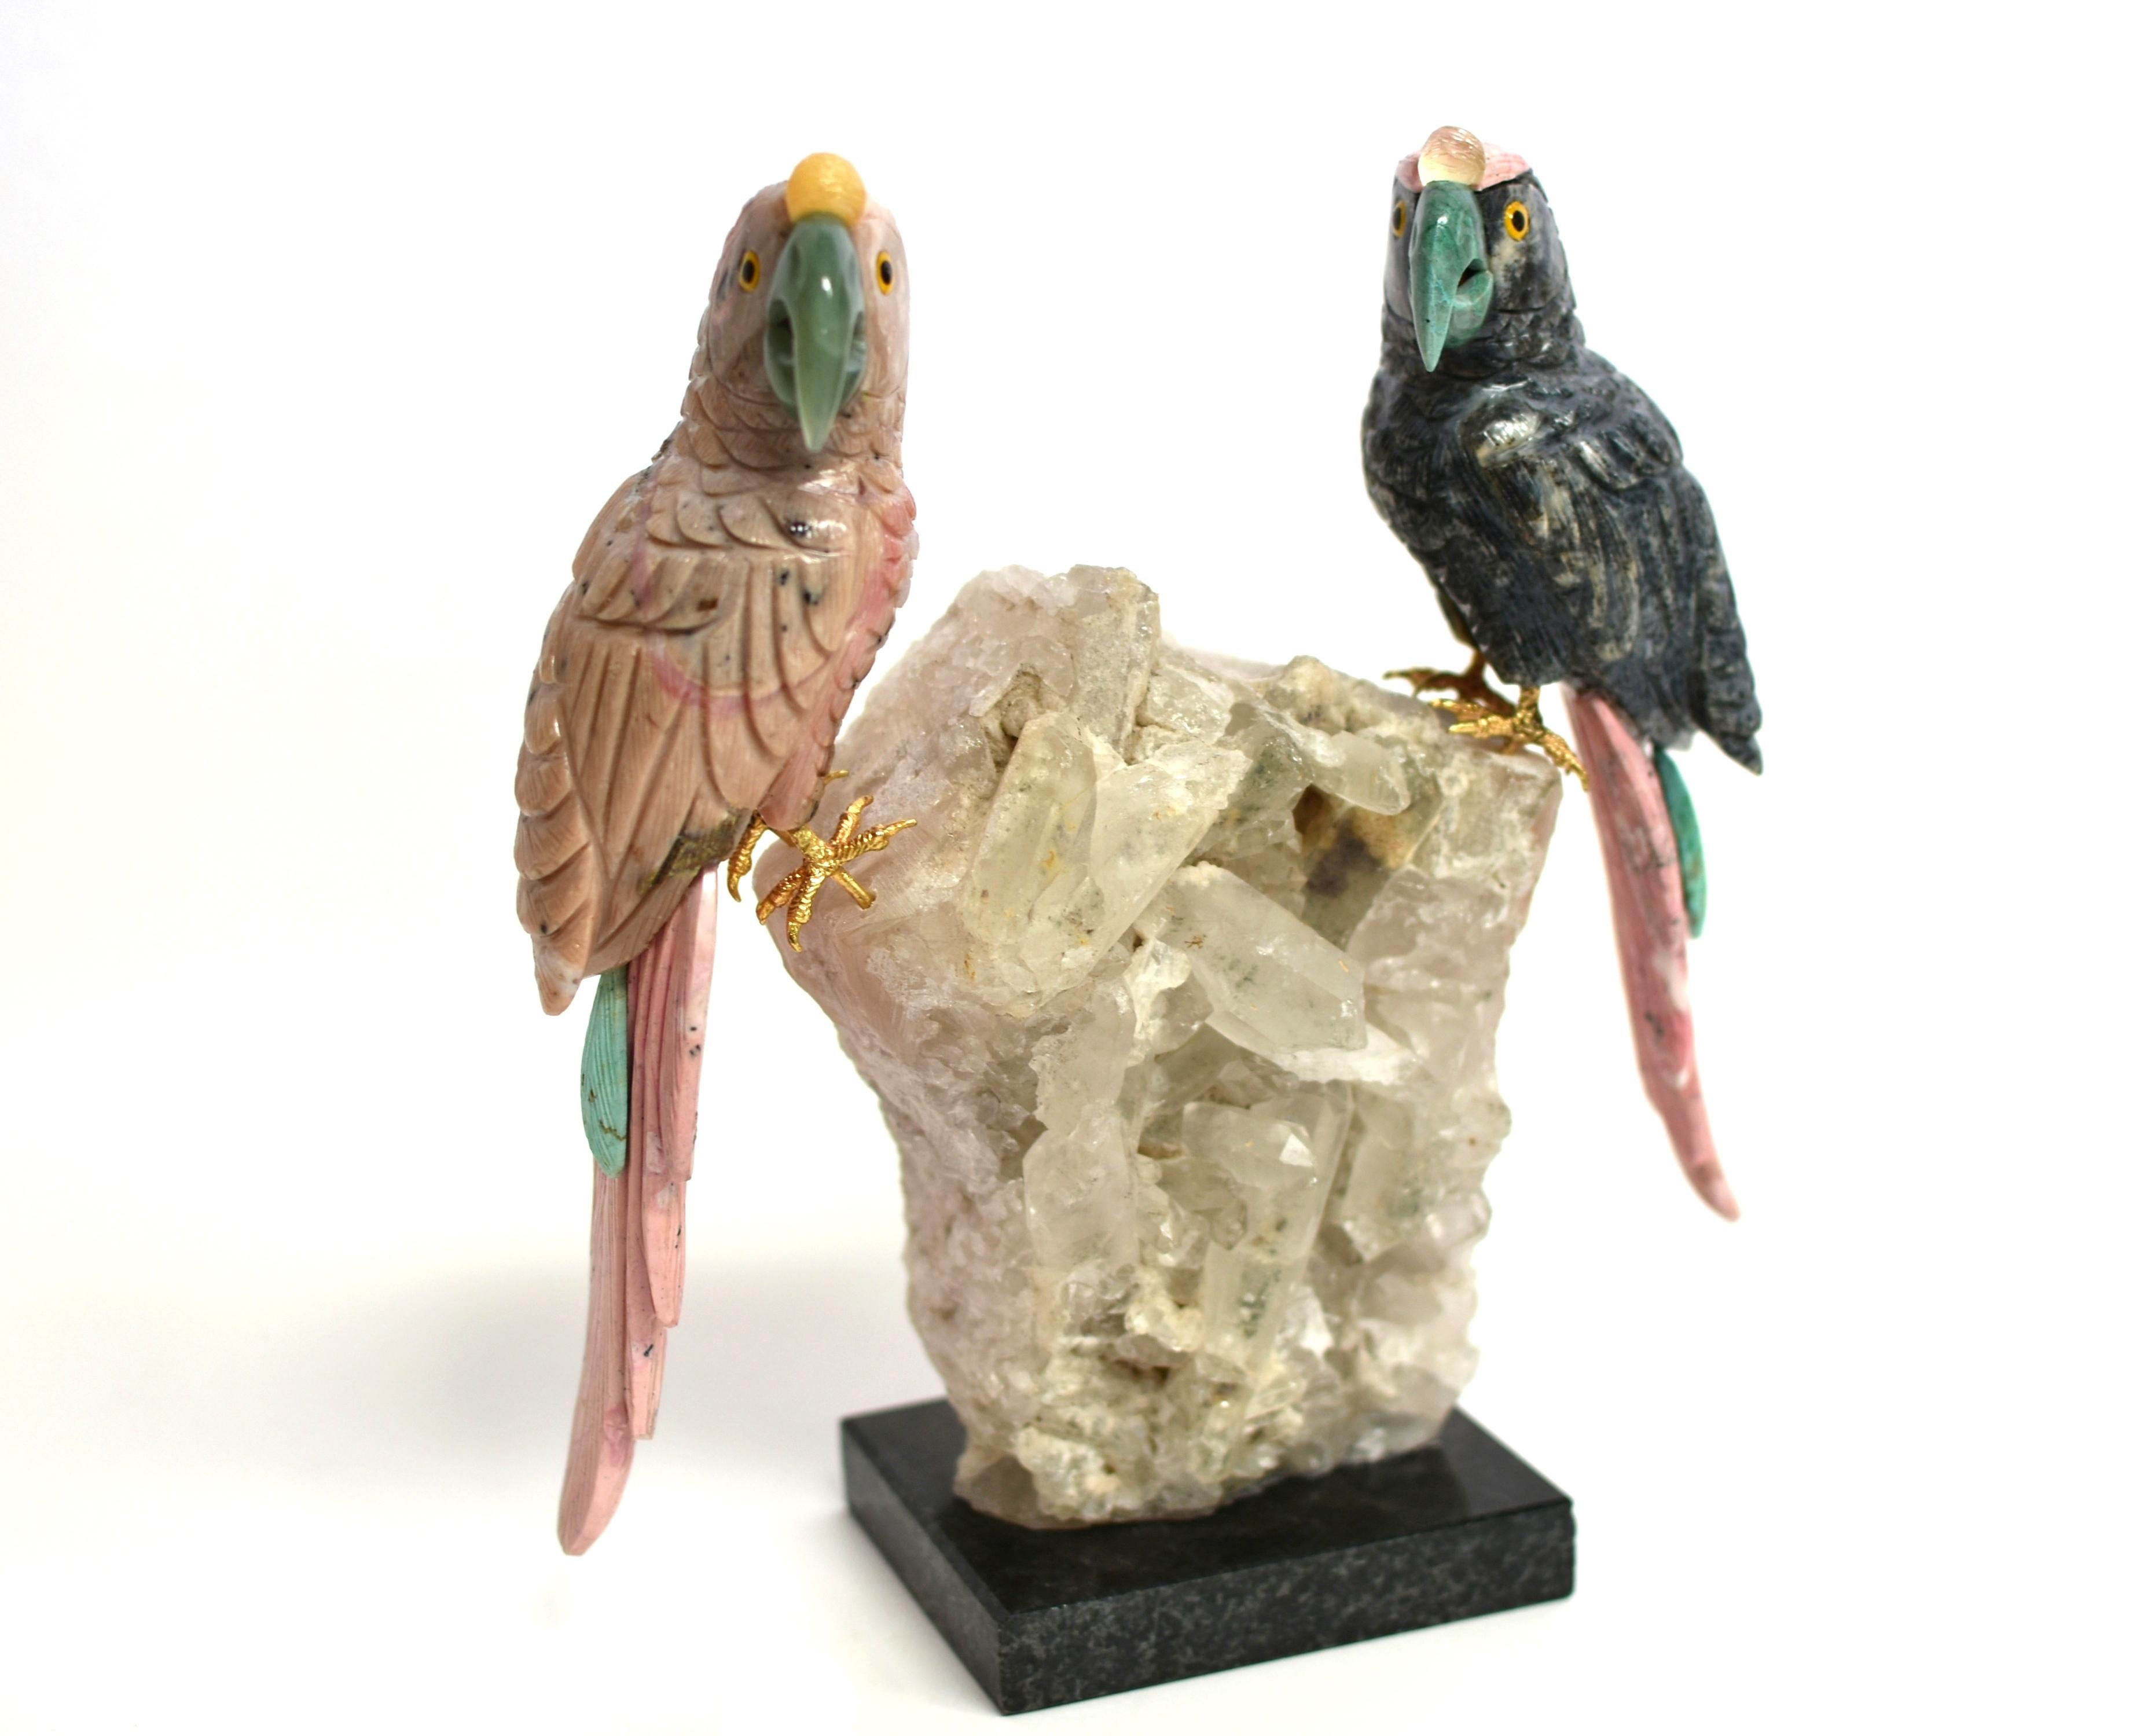 A finely carved, 7.8 lb, all natural multi-gemstone parrot sculpture. Naturalistically modeled perched on rock crystal clusters, the left bird with beautiful plumage made of pink opal and rhodonite with aventurine beak and orange calcite crown, the